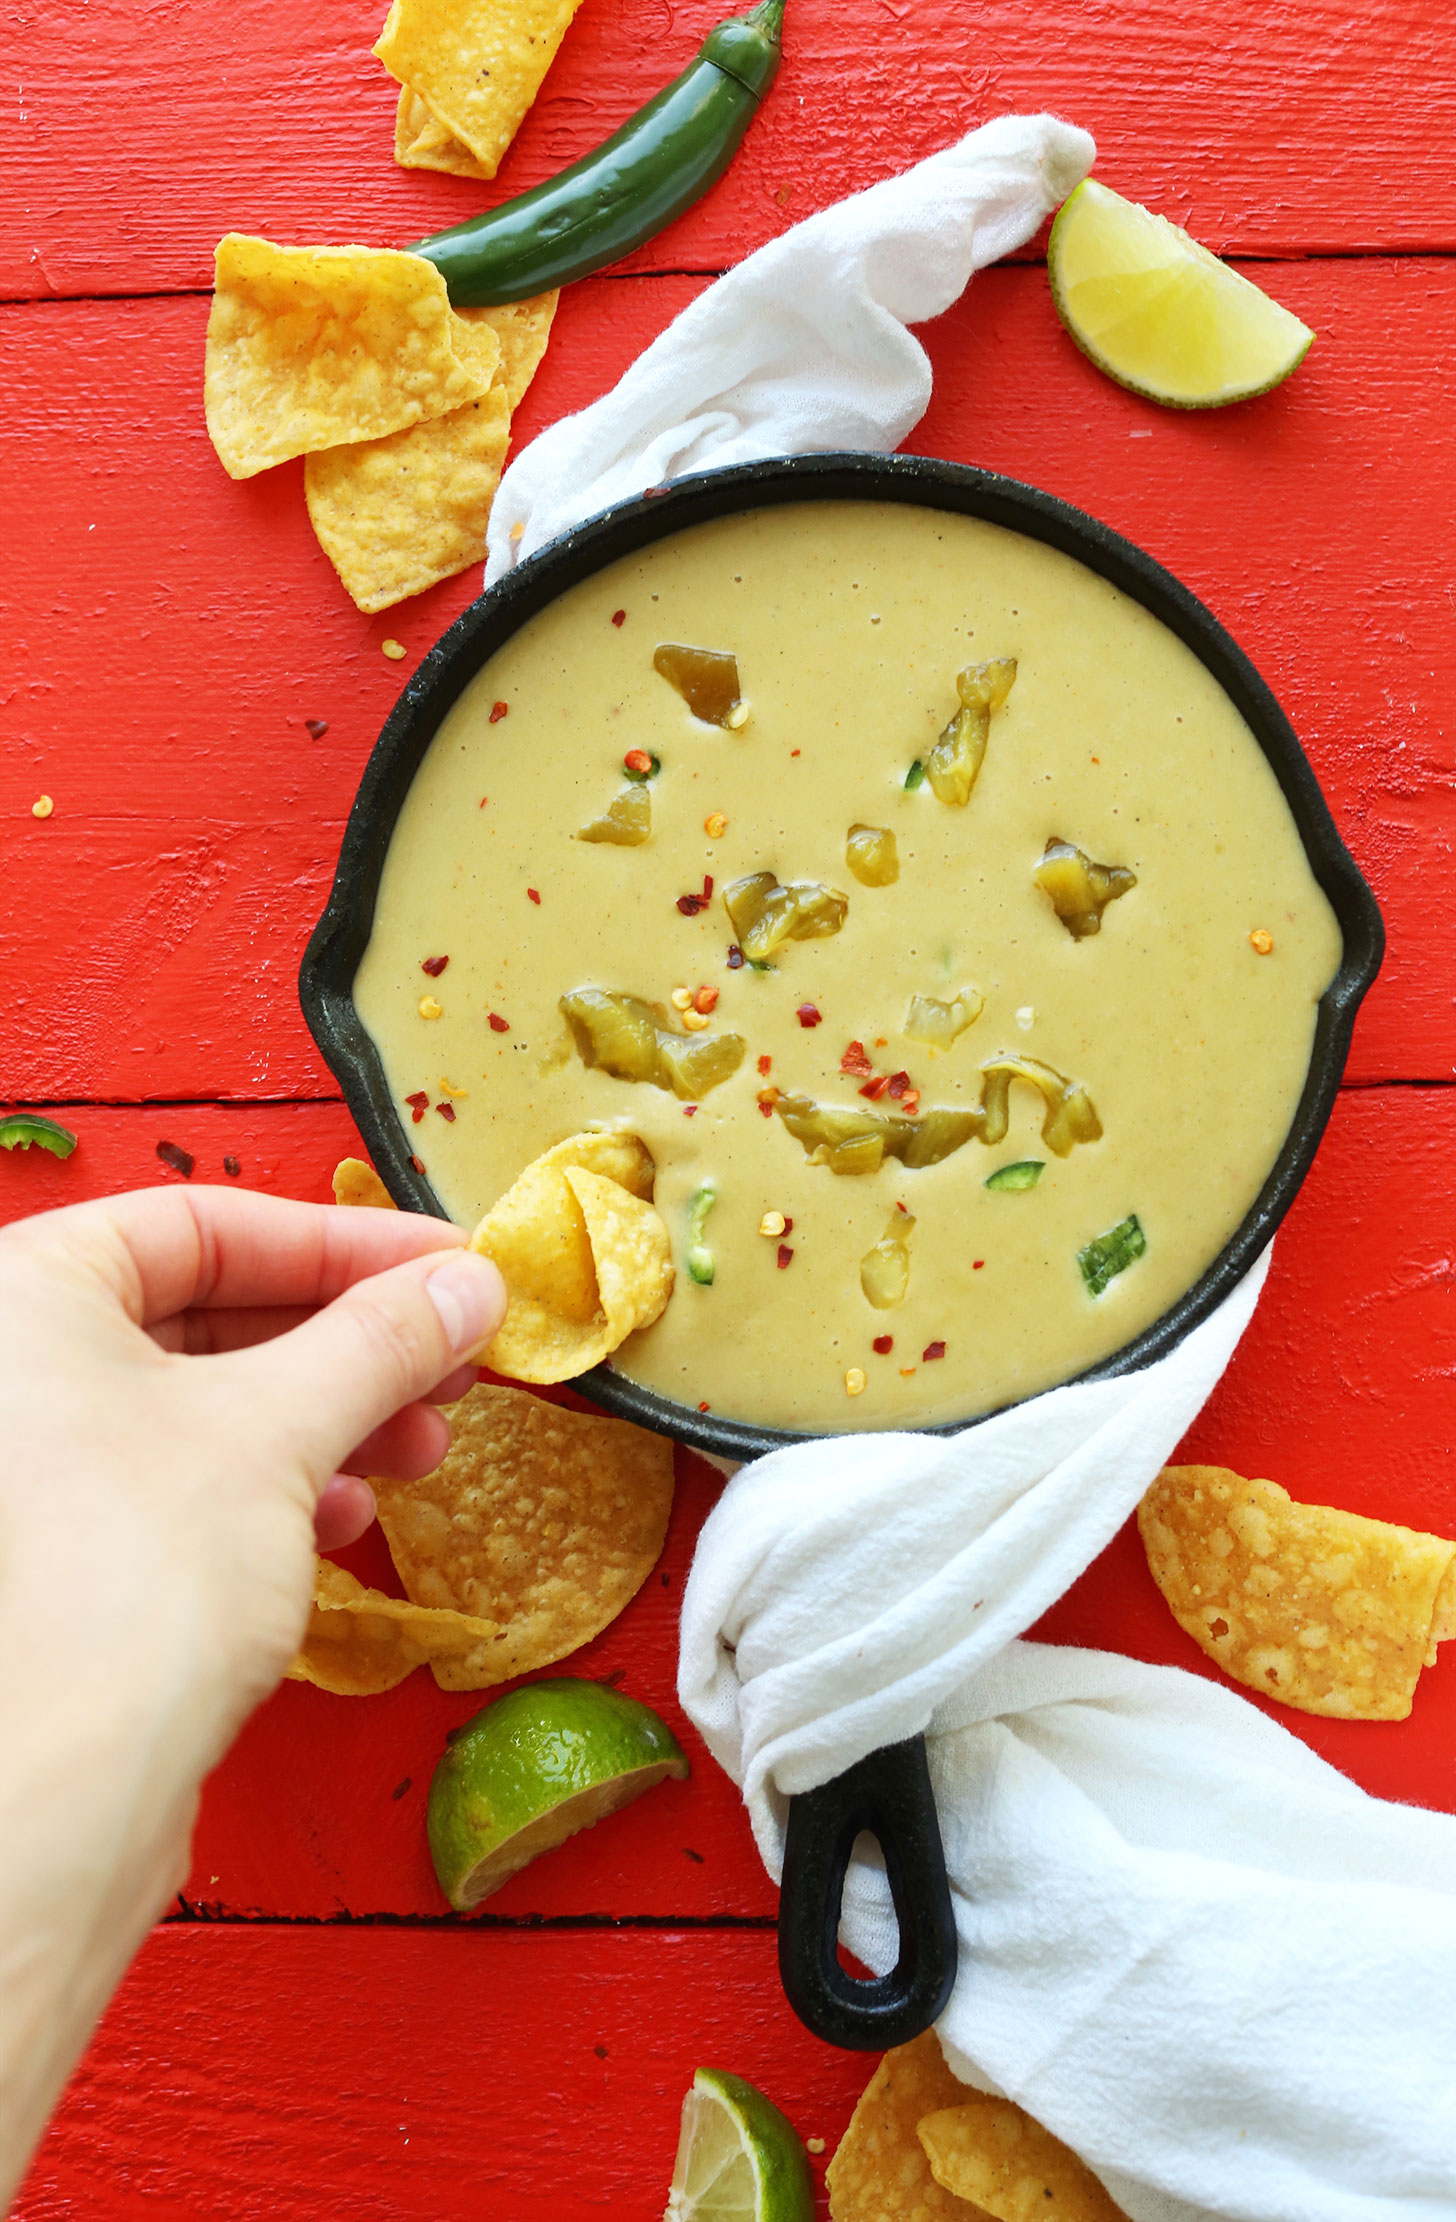 Scooping up Vegan Green Chili Queso onto a tortilla chip for a perfect plant-based snack